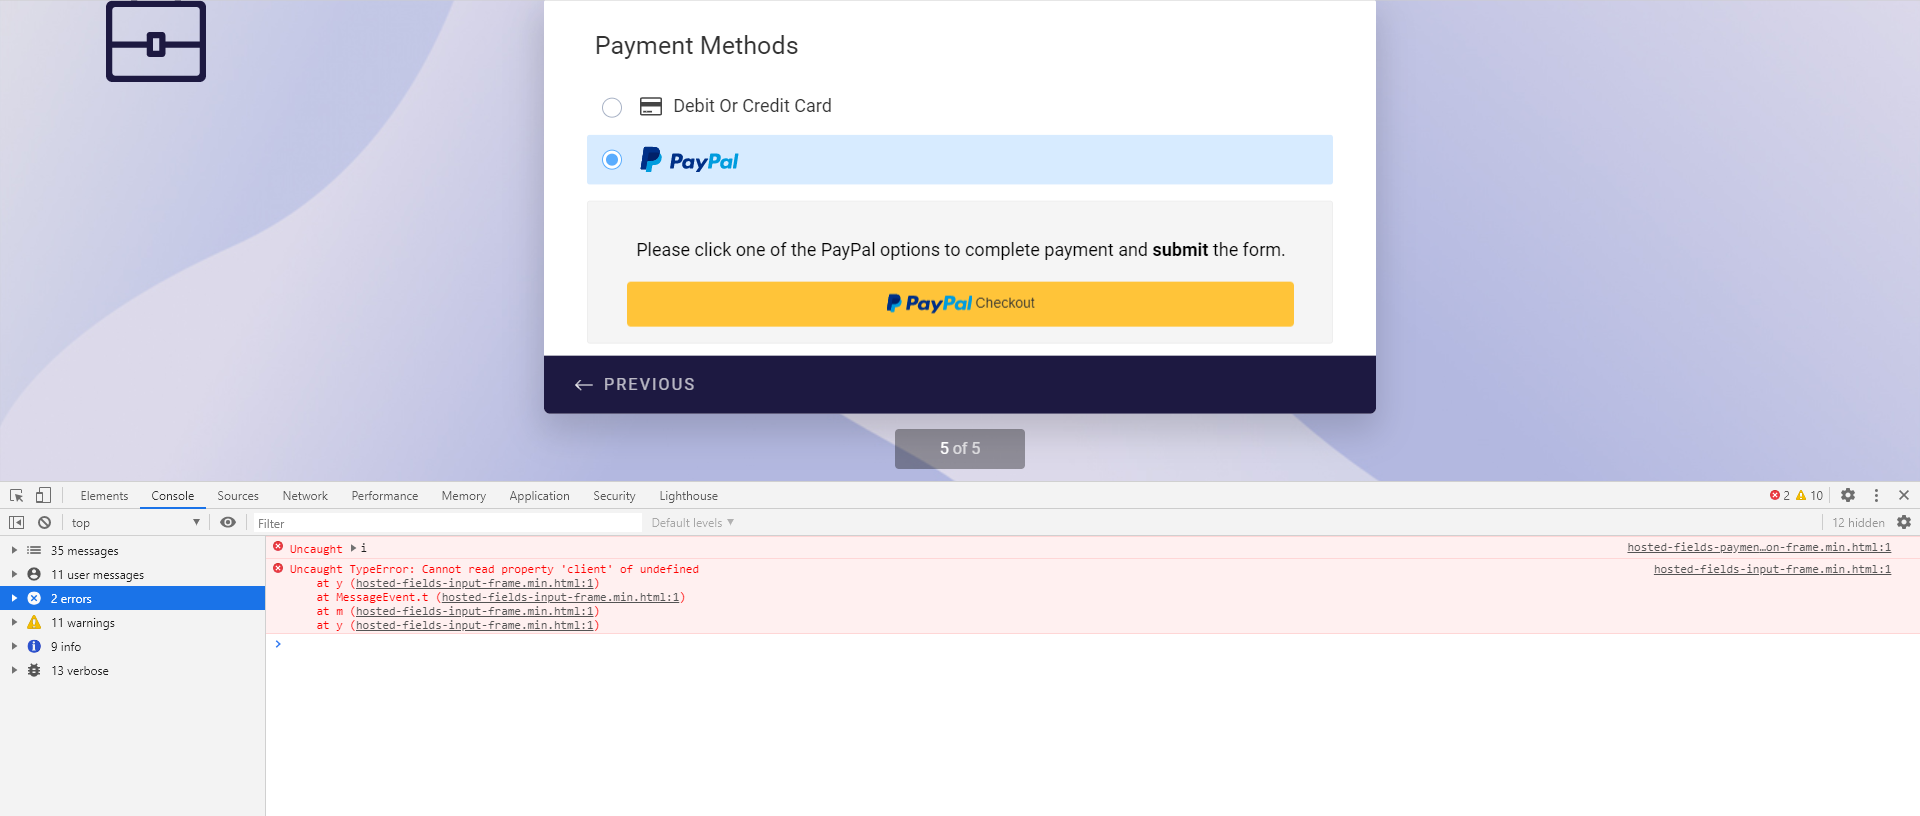 Paypal Business: there are errors in the browser console when choosing Paypal to pay Image 1 Screenshot 20